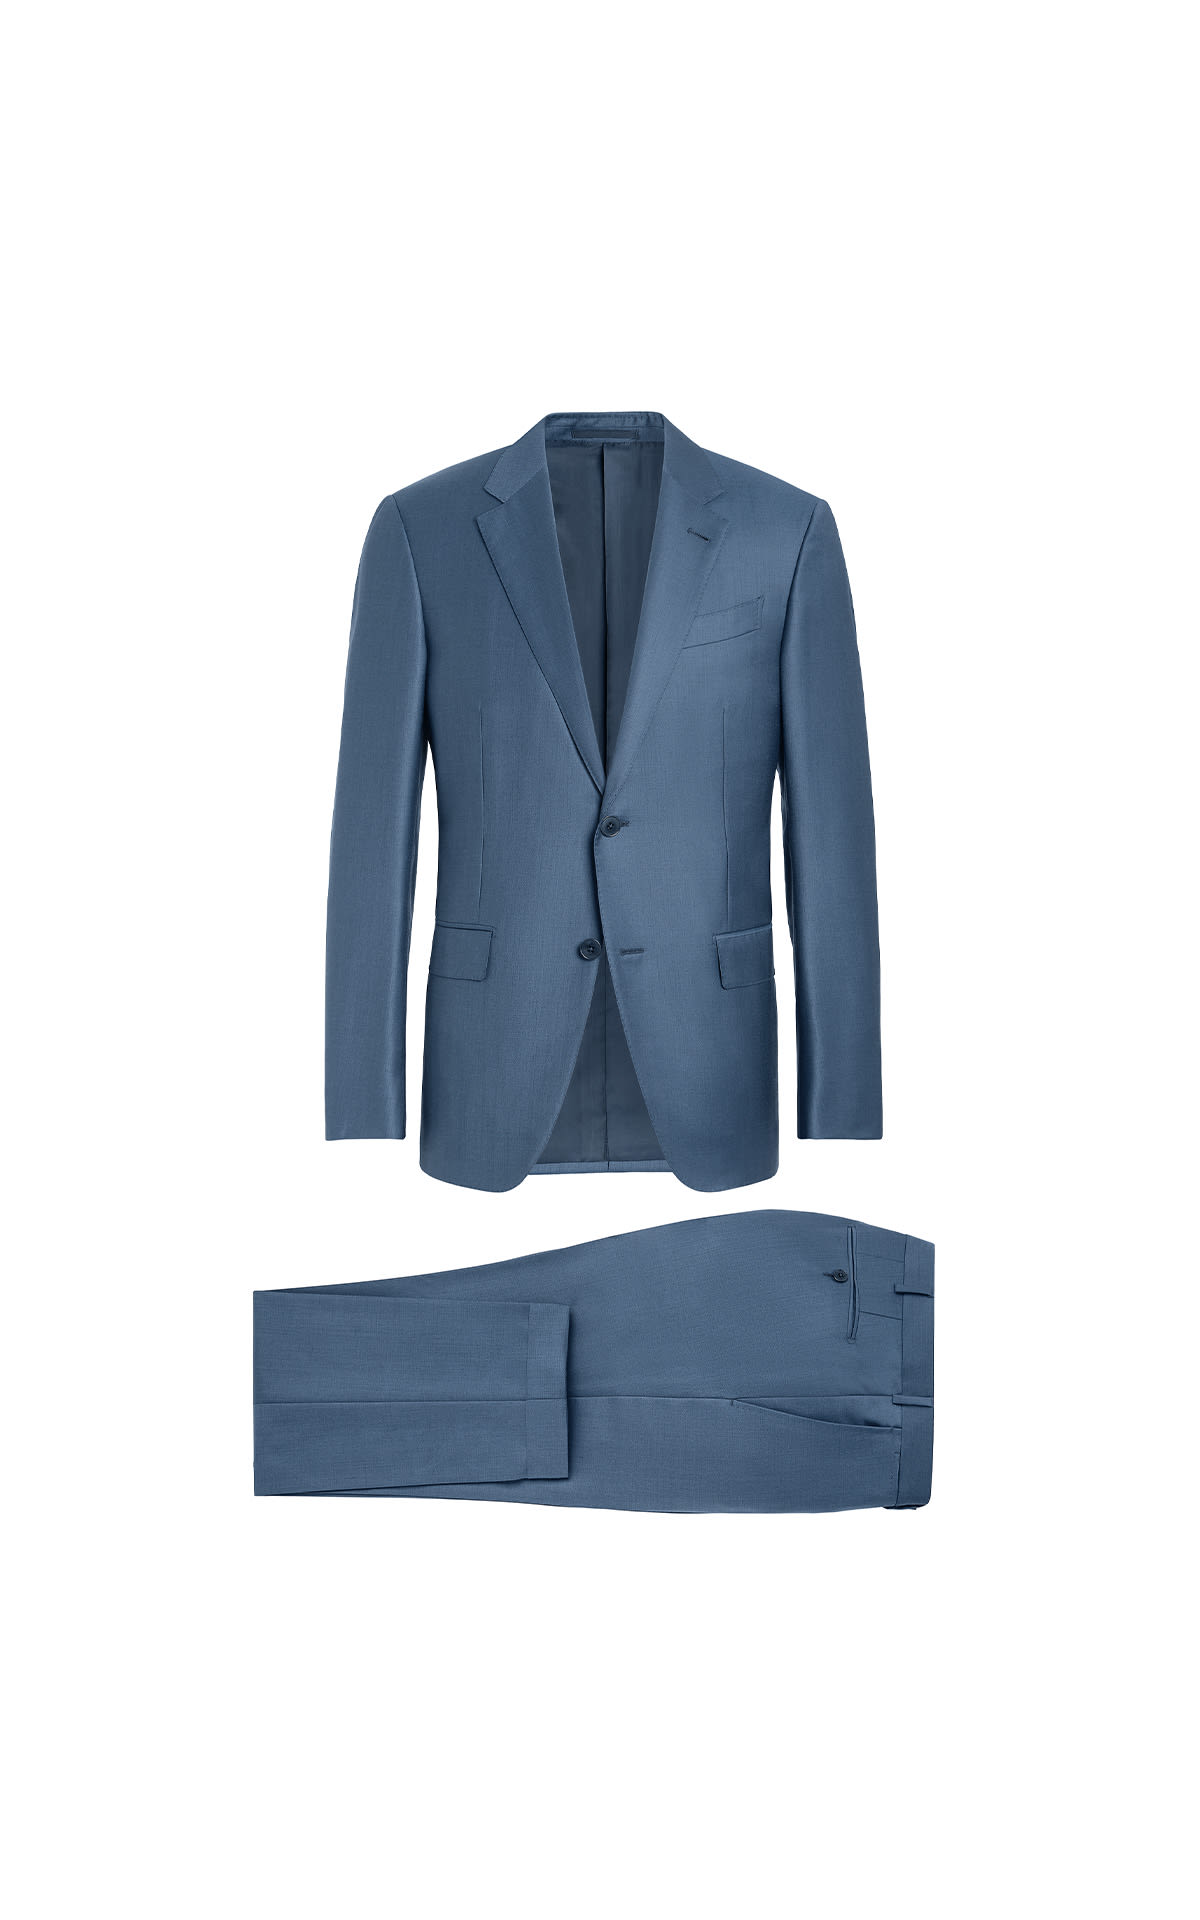 Zegna Trophy tailored suit